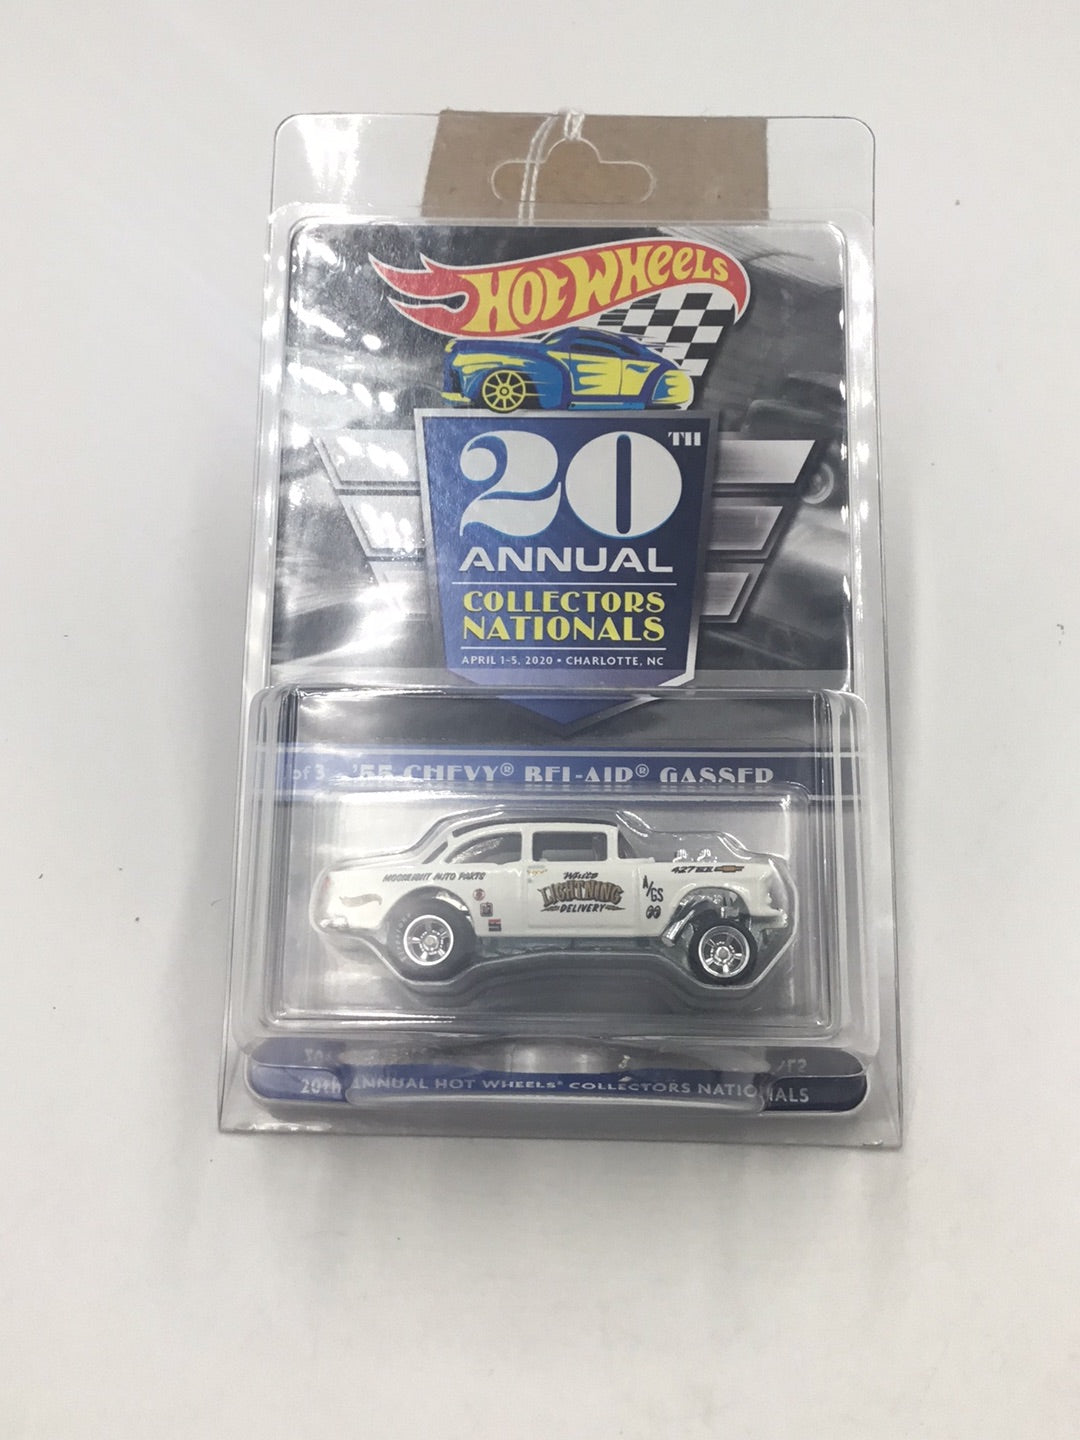 Hot wheels 20th annual collectors Nationals 55 Bel Air Gasser 523/6500 in Protector